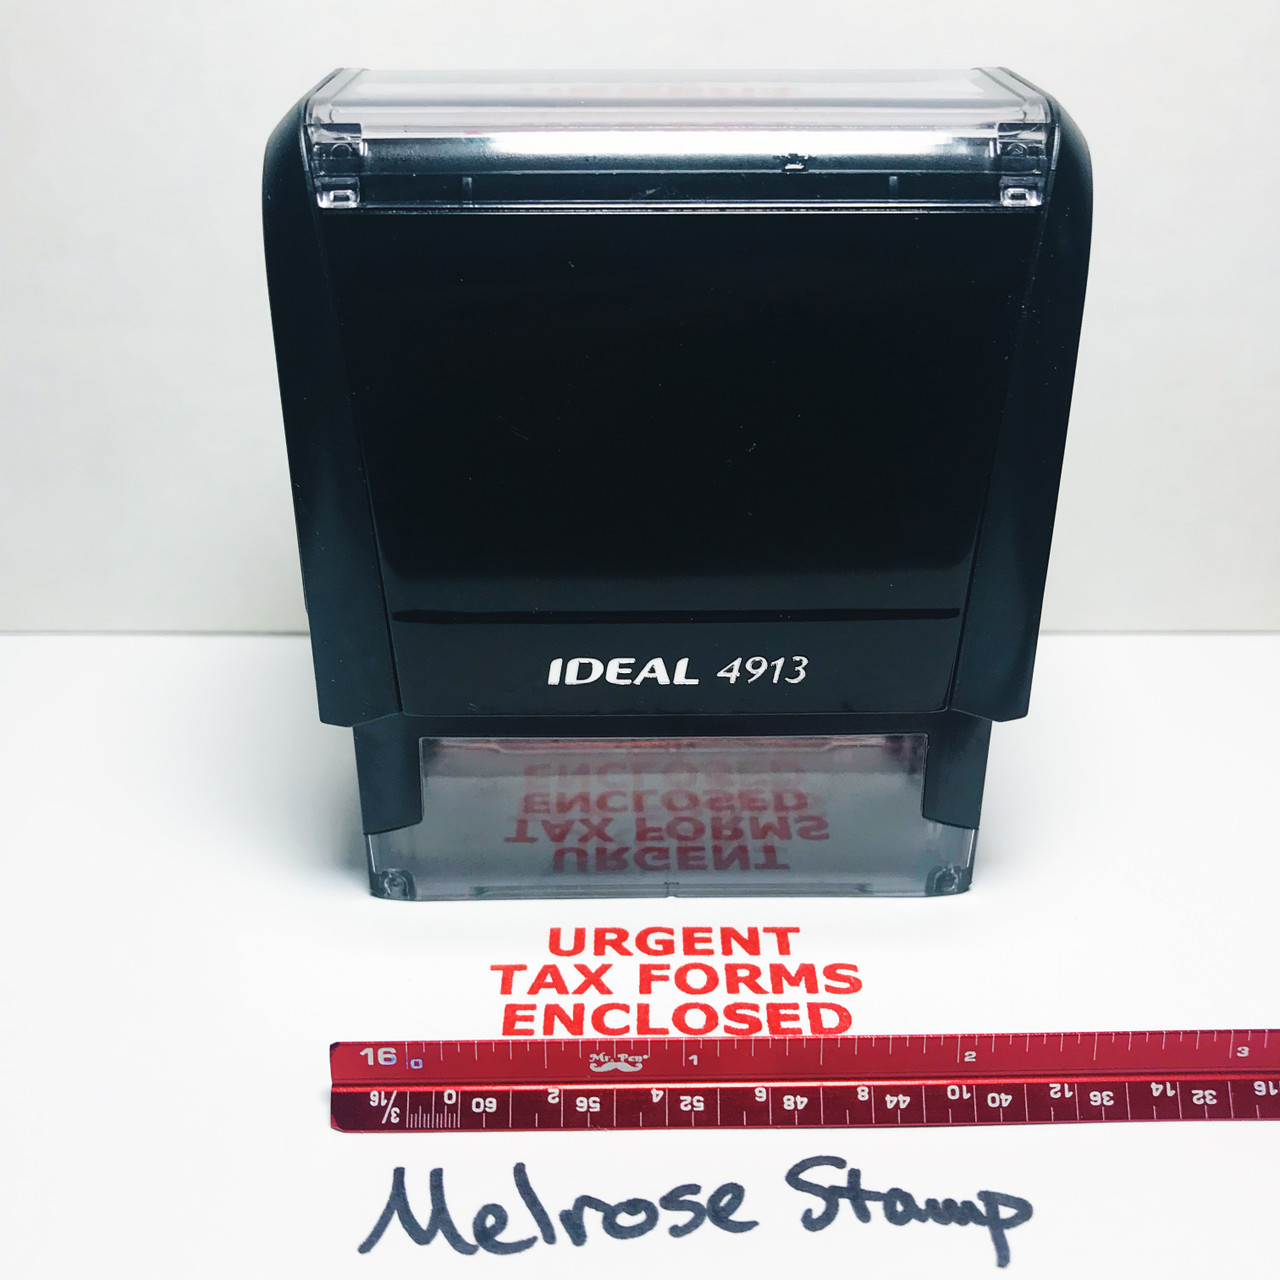 Urgent Tax Forms Enclosed Rubber Stamp for mail use self-inking